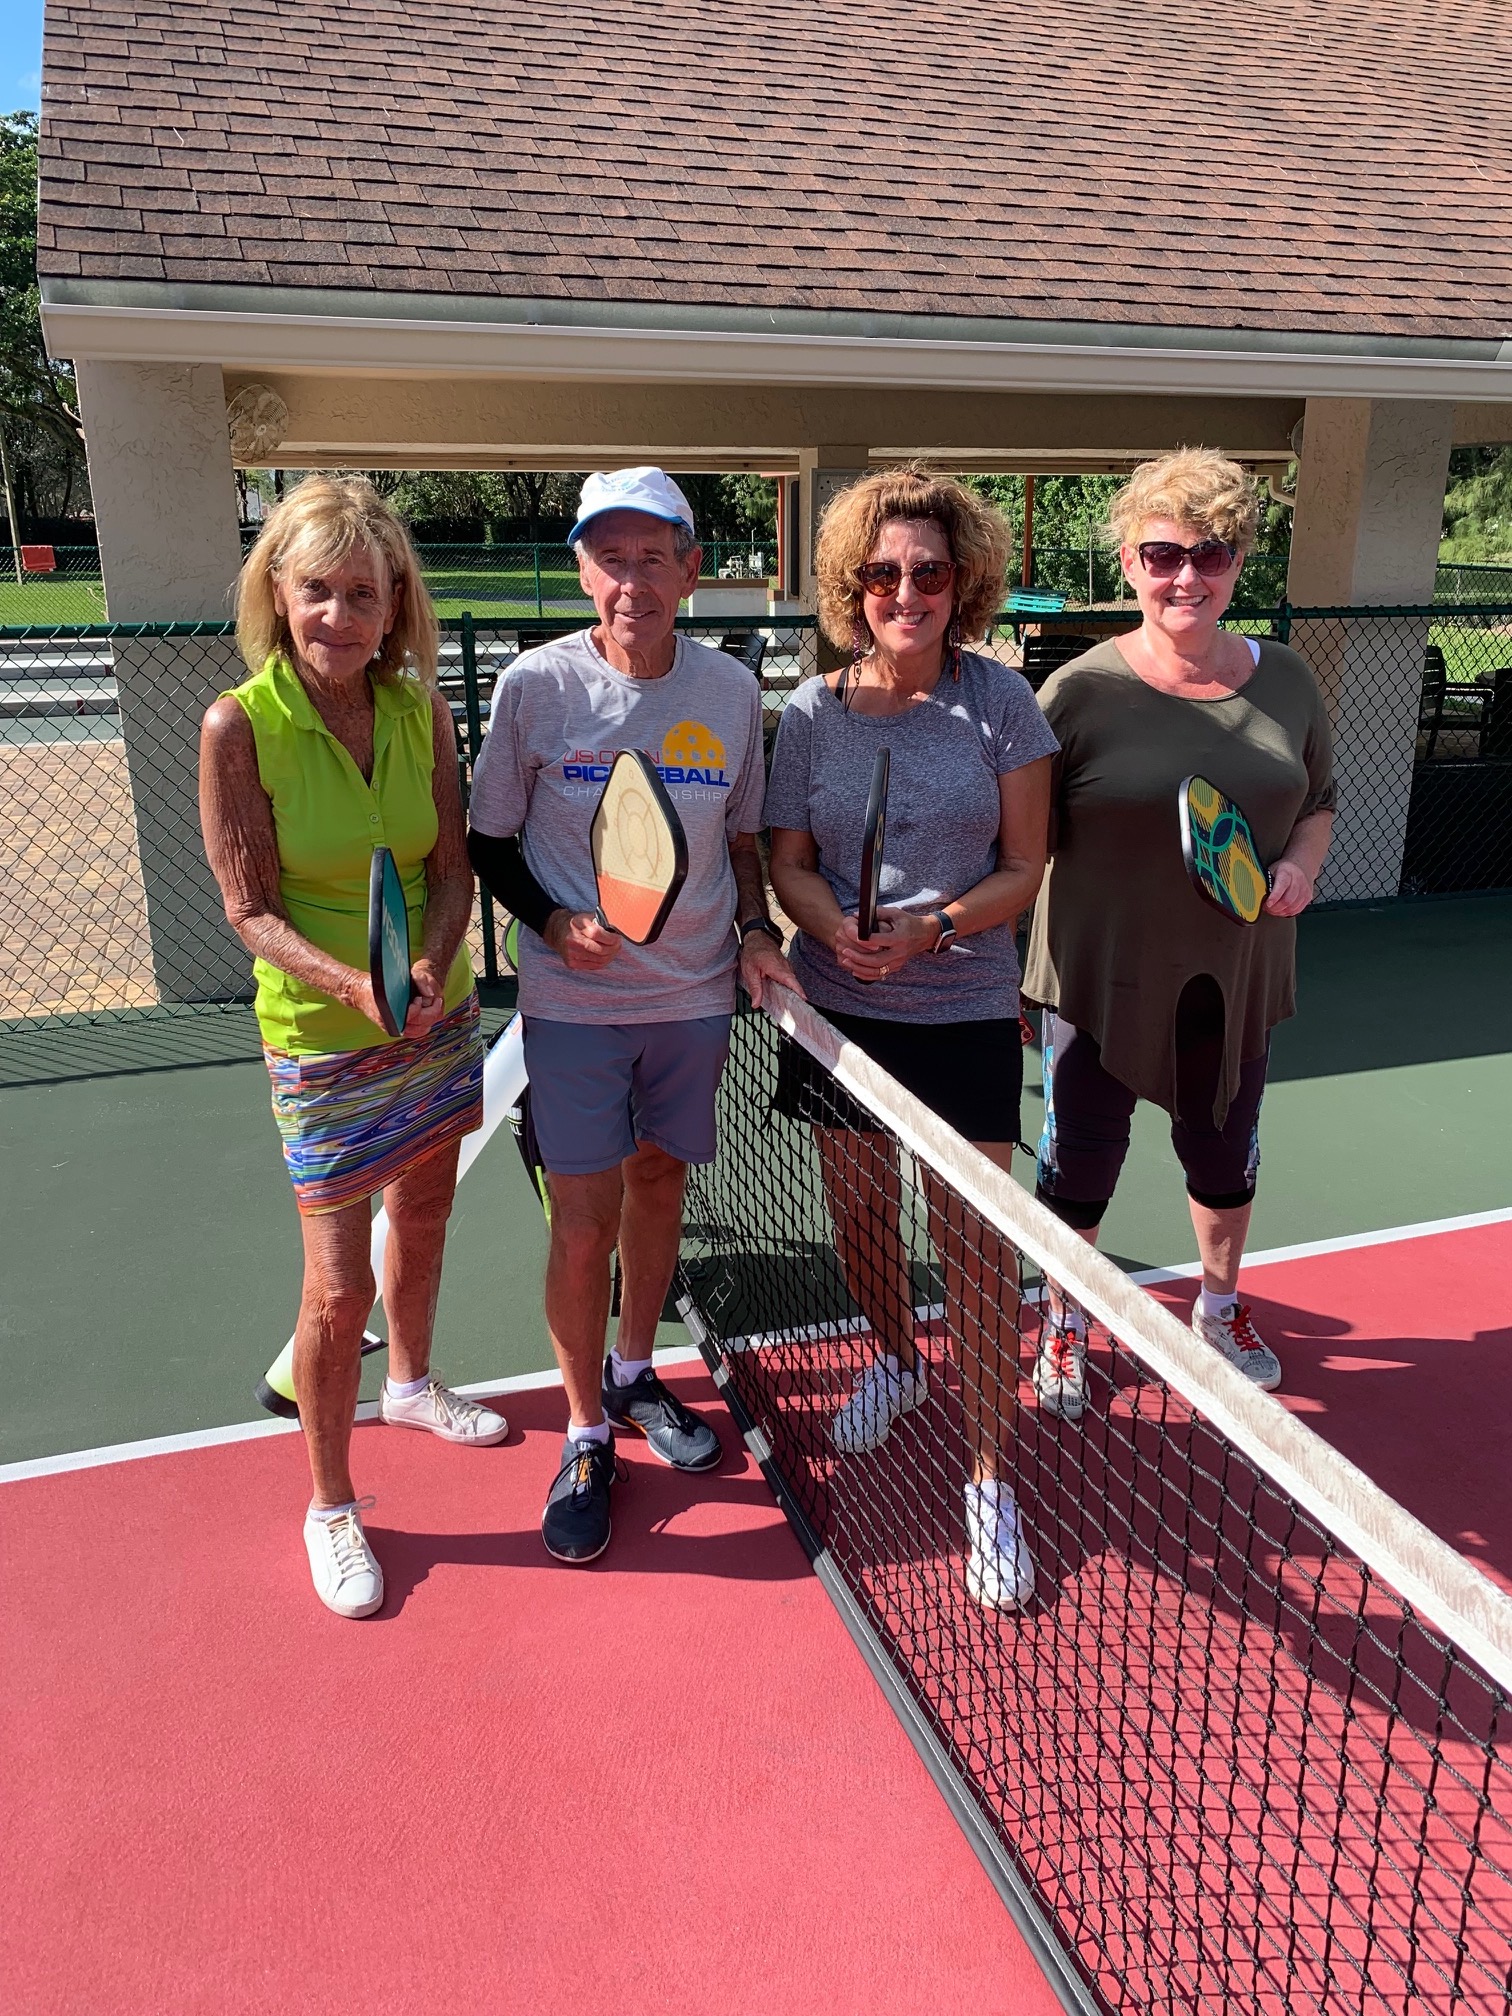 Bob with Svetlana, Suzanne, and Nancy after a clinic in Delray Beach, FL